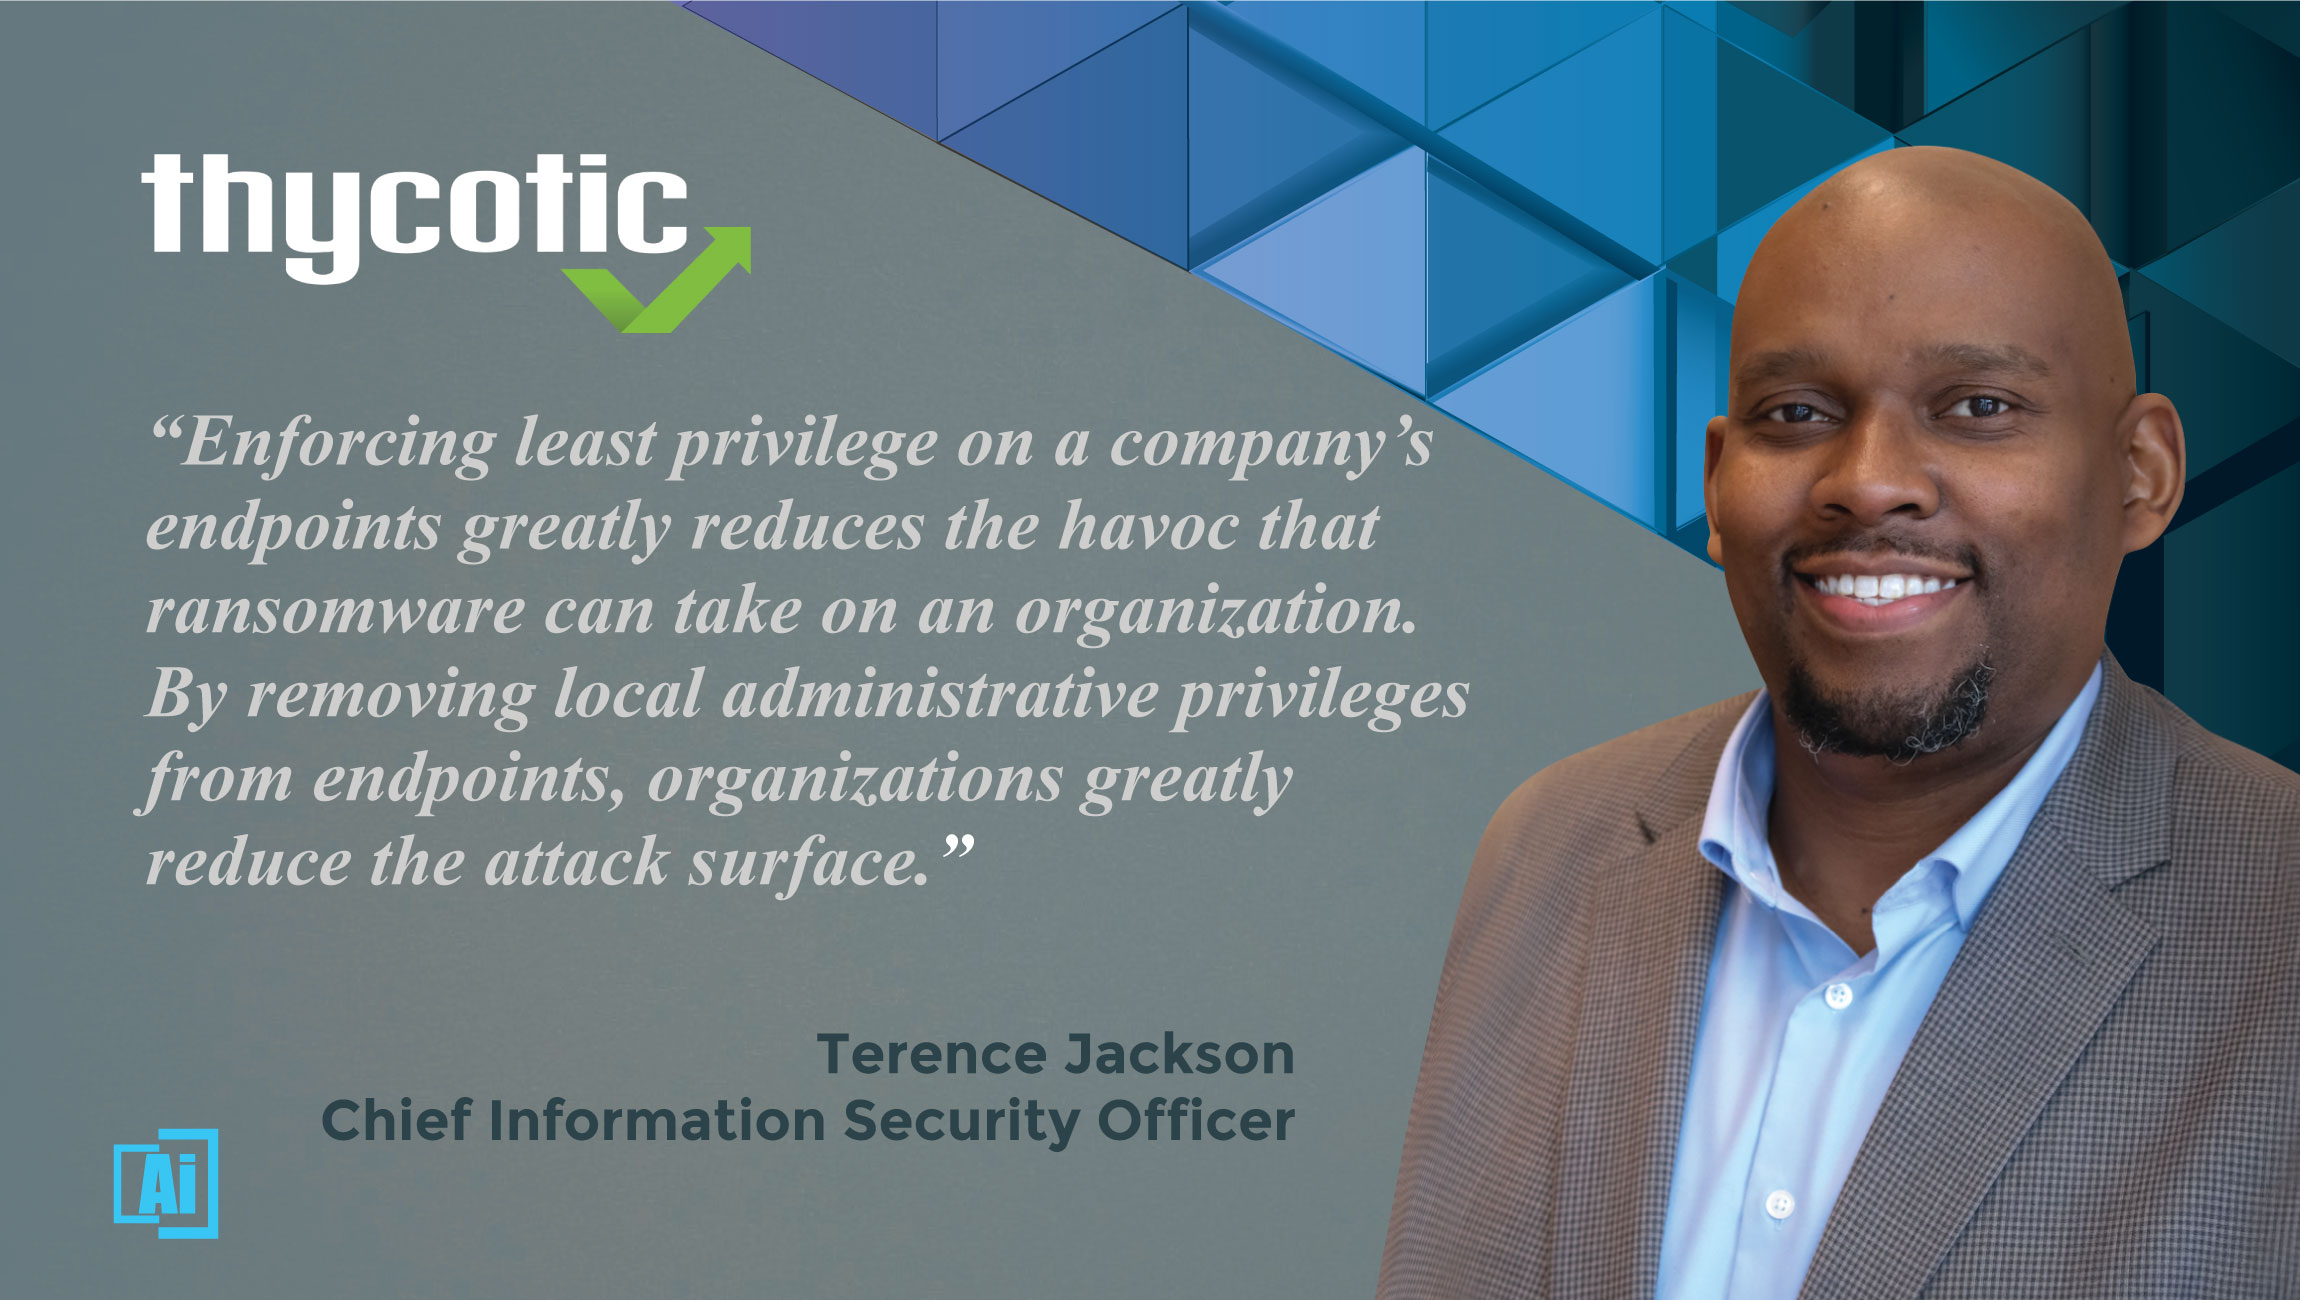 AiThority Interview With Terence Jackson, Chief Information Security Officer at Thycotic